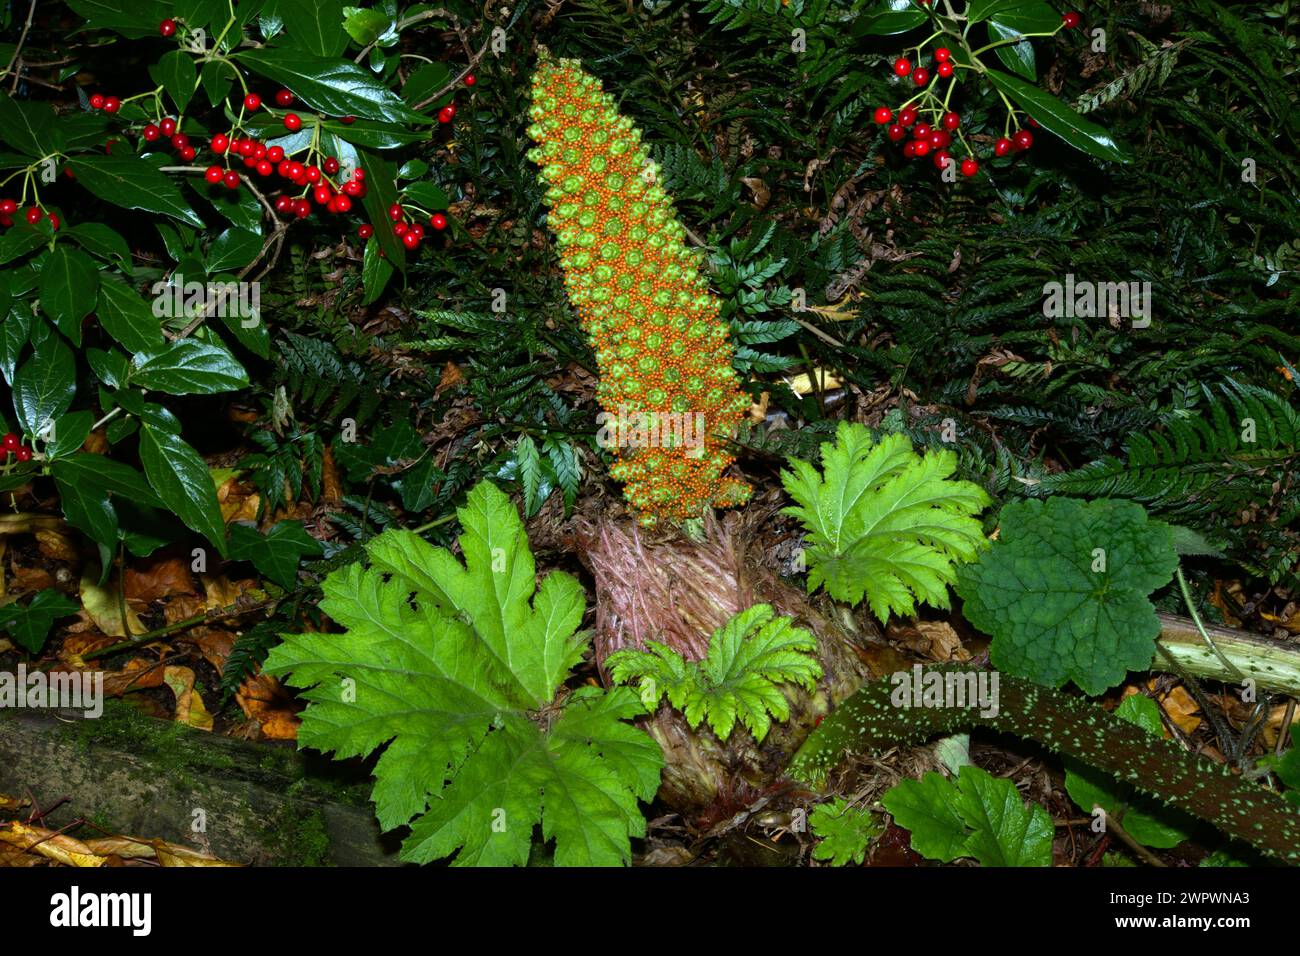 Gunnera cf tinctoria (Chilean rhubarb) is native to Chile and Argentina where it grows along stream sides. Stock Photo